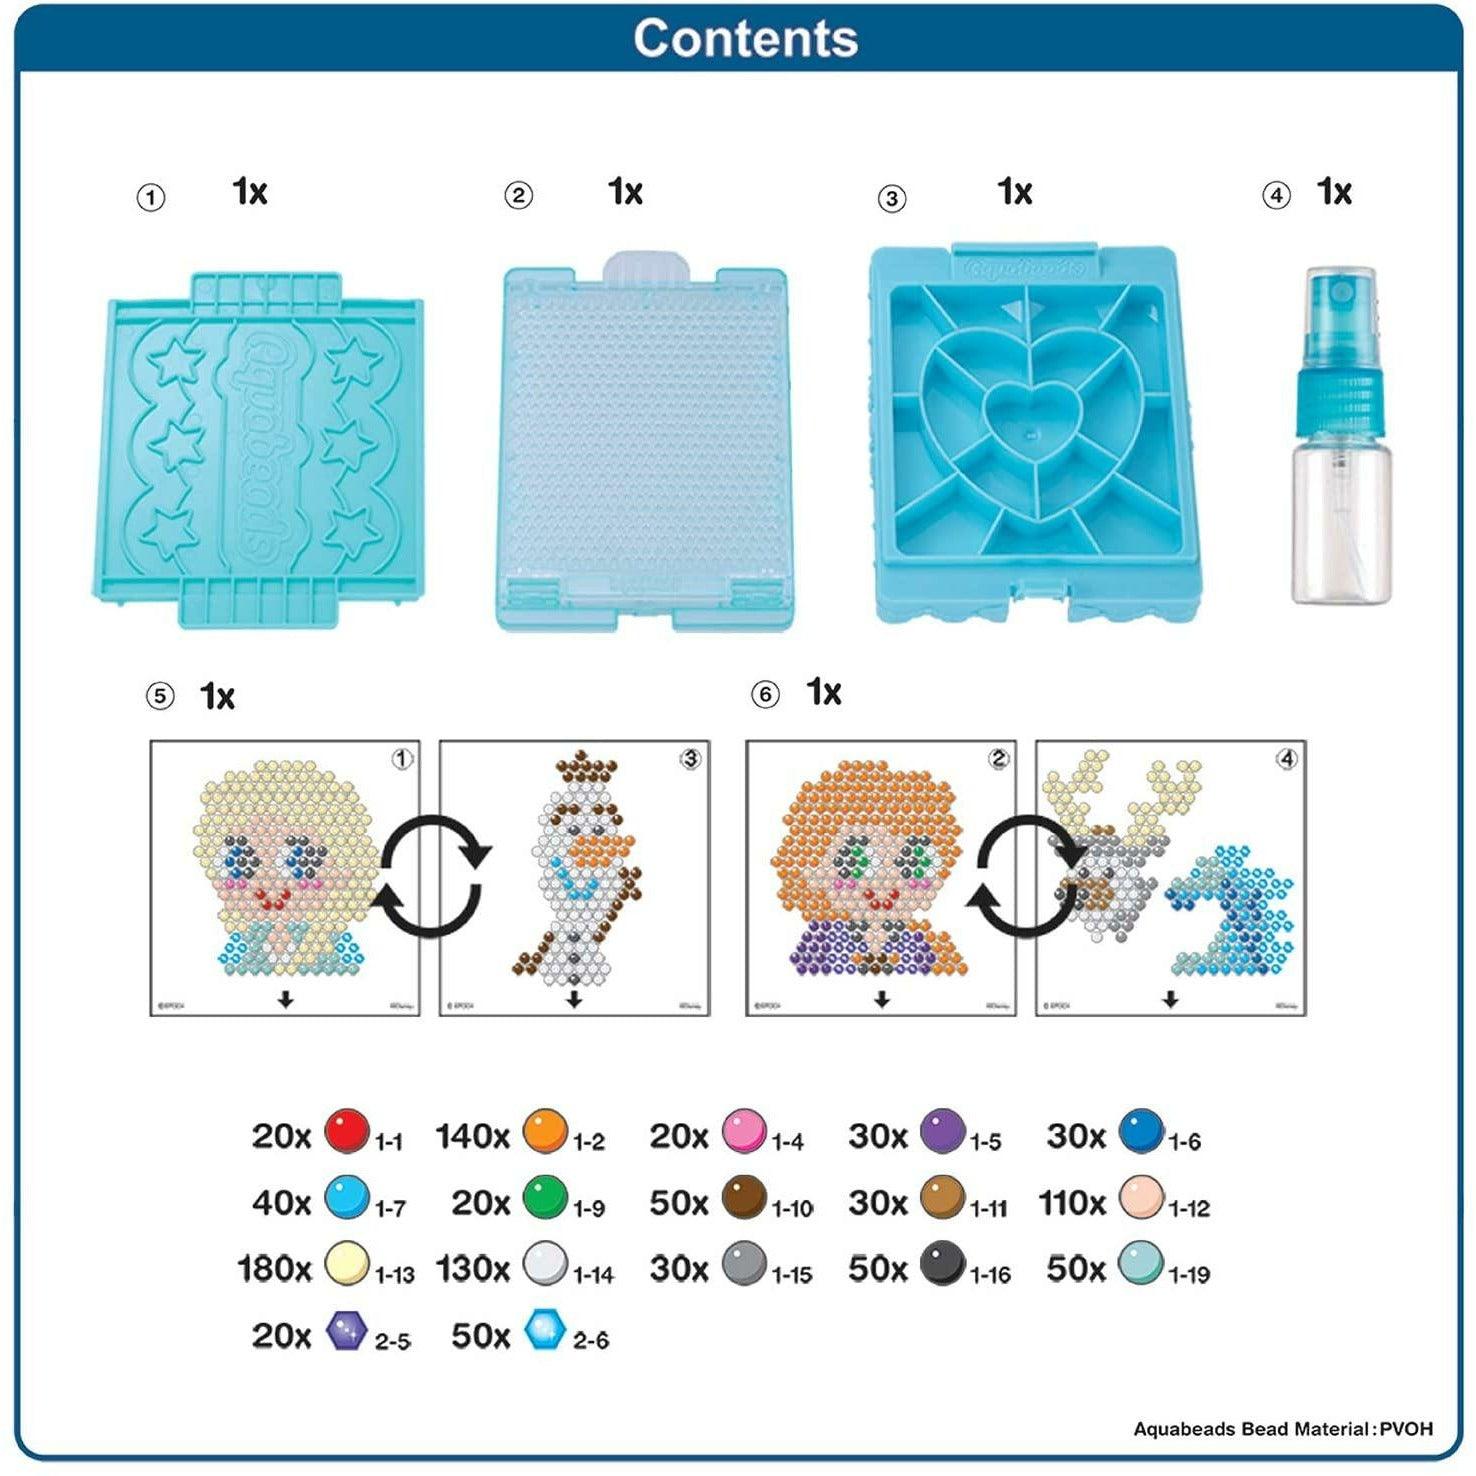 Aquabeads 31369 Frozen 2 Playset Over 1000 Beads - BumbleToys - 5-7 Years, Cecil, Frozen, Girls, Make & Create